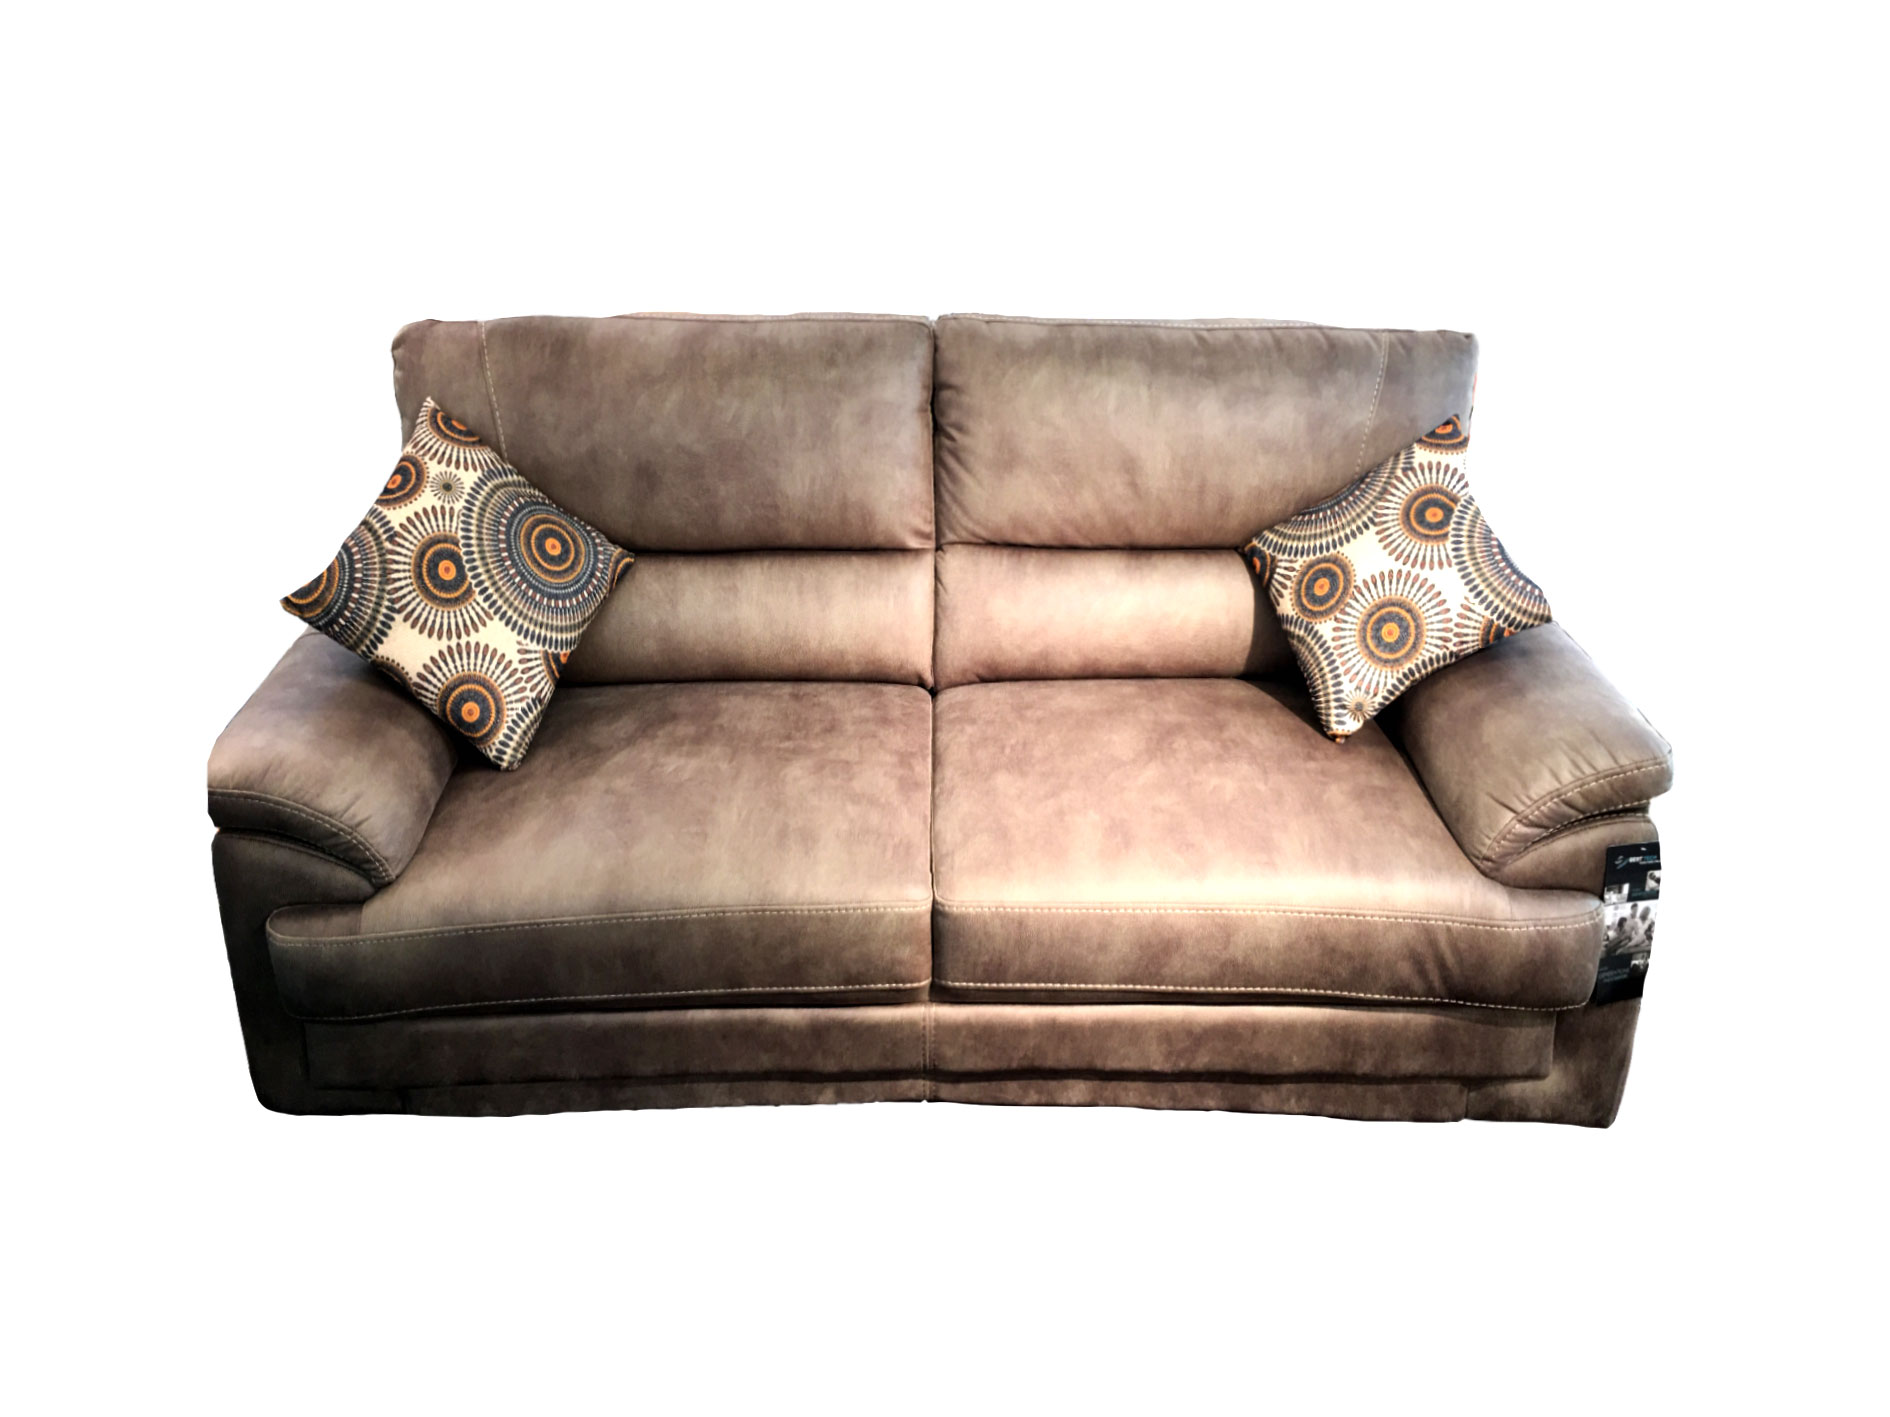 Cheers Sofa - 9559 L3 - 3 Seater Fabric Sofa | Best Tech Online Singapore1890 x 1417